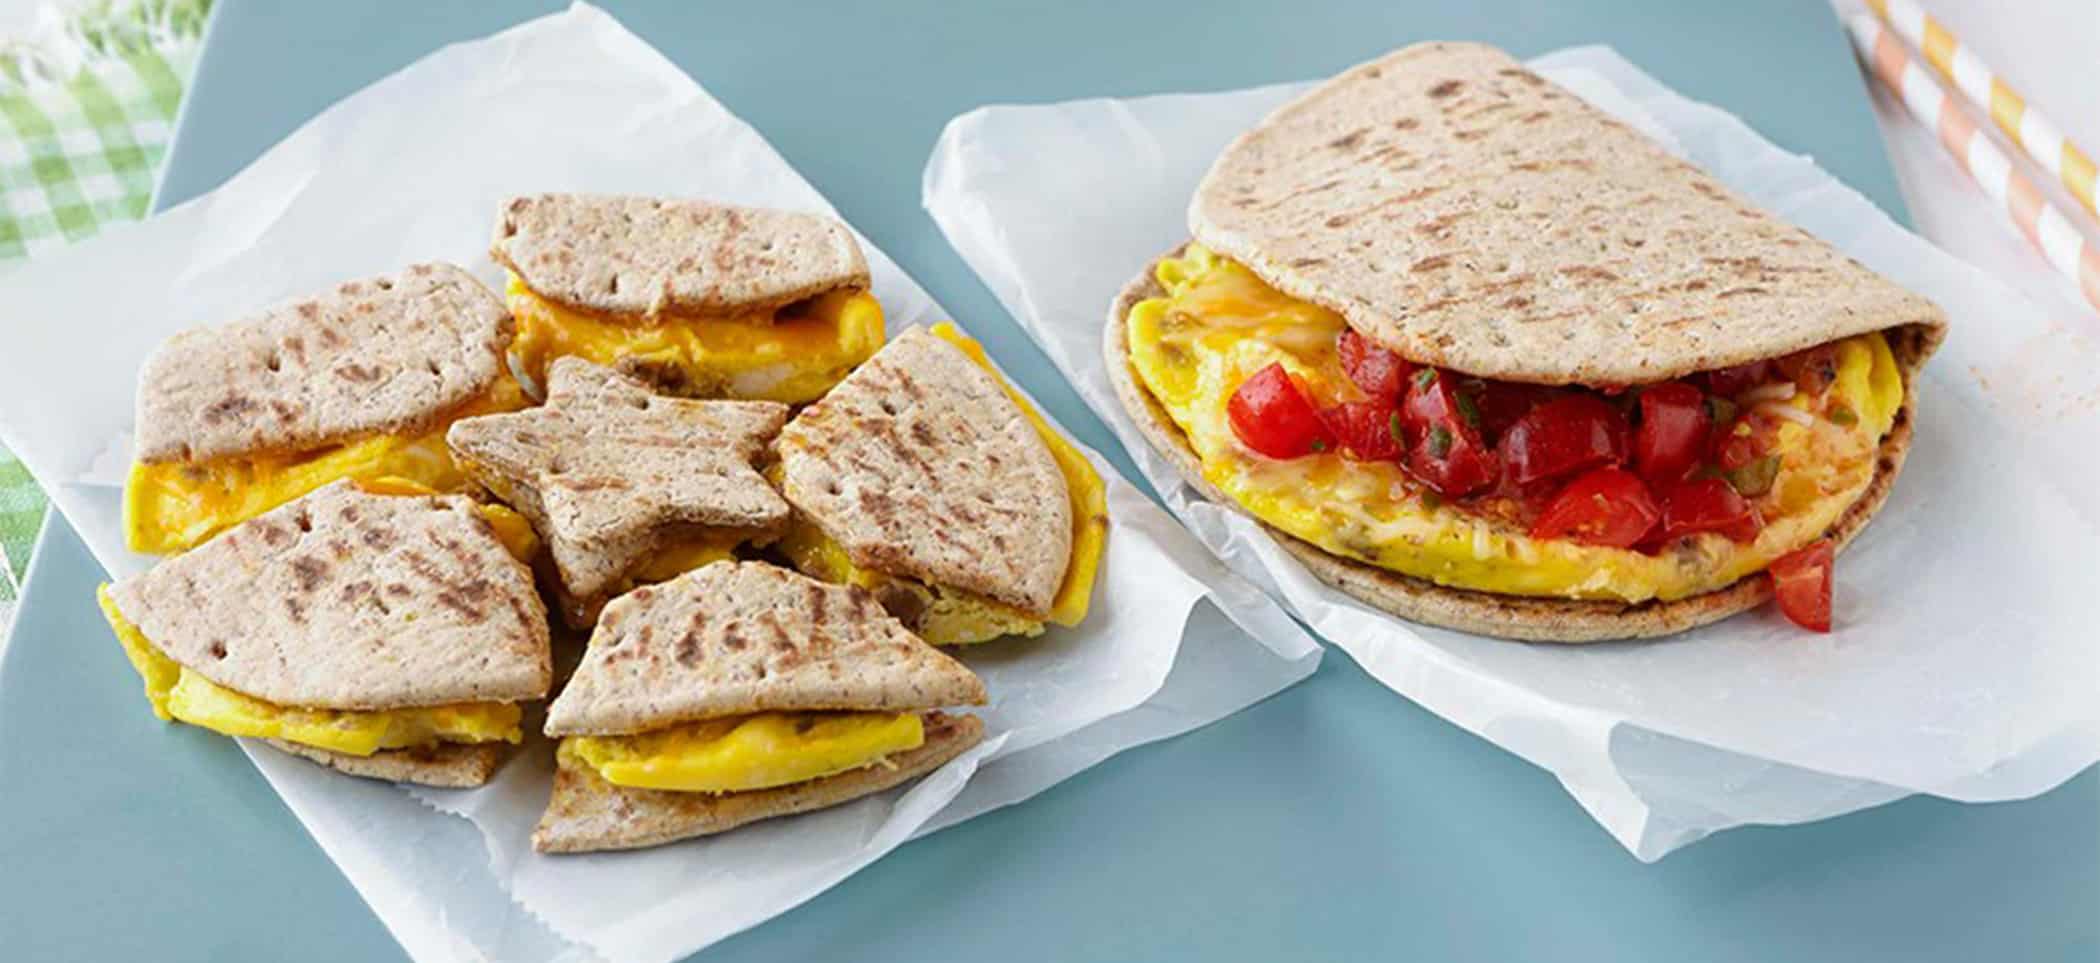 Egg, Sausage & Cheese Breakfast Puzzle Sandwich